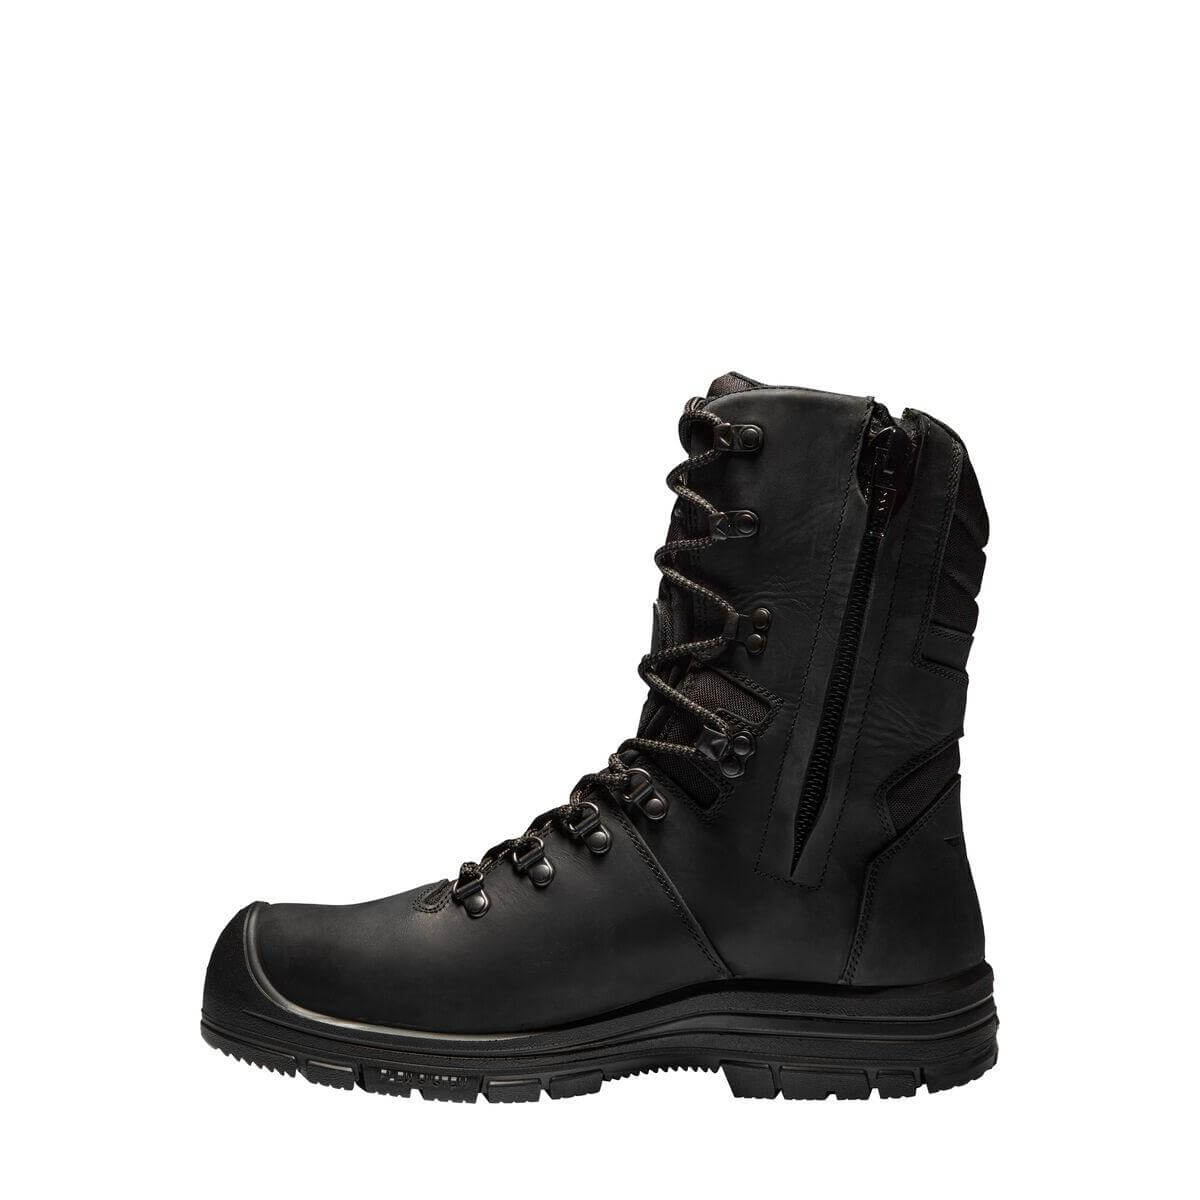 Solid Gear by Snickers 75001 Delta GTX High Leg Side Zip Premium Leather Gore Tex Waterproof Wool Lined Winter S3 Safety Boots Black 02 #colour_black